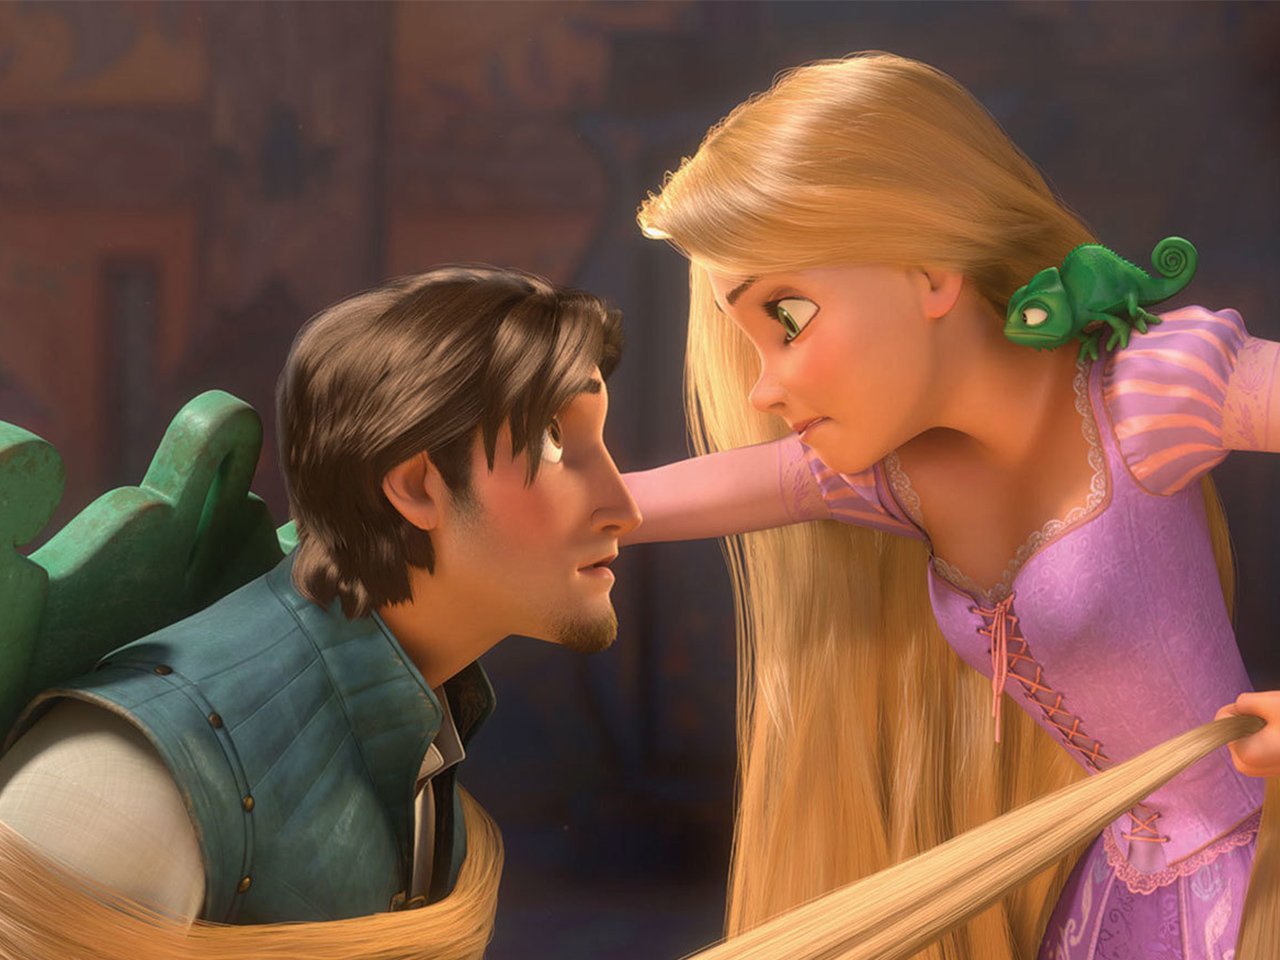 A still from the kids' animated movie Tangled